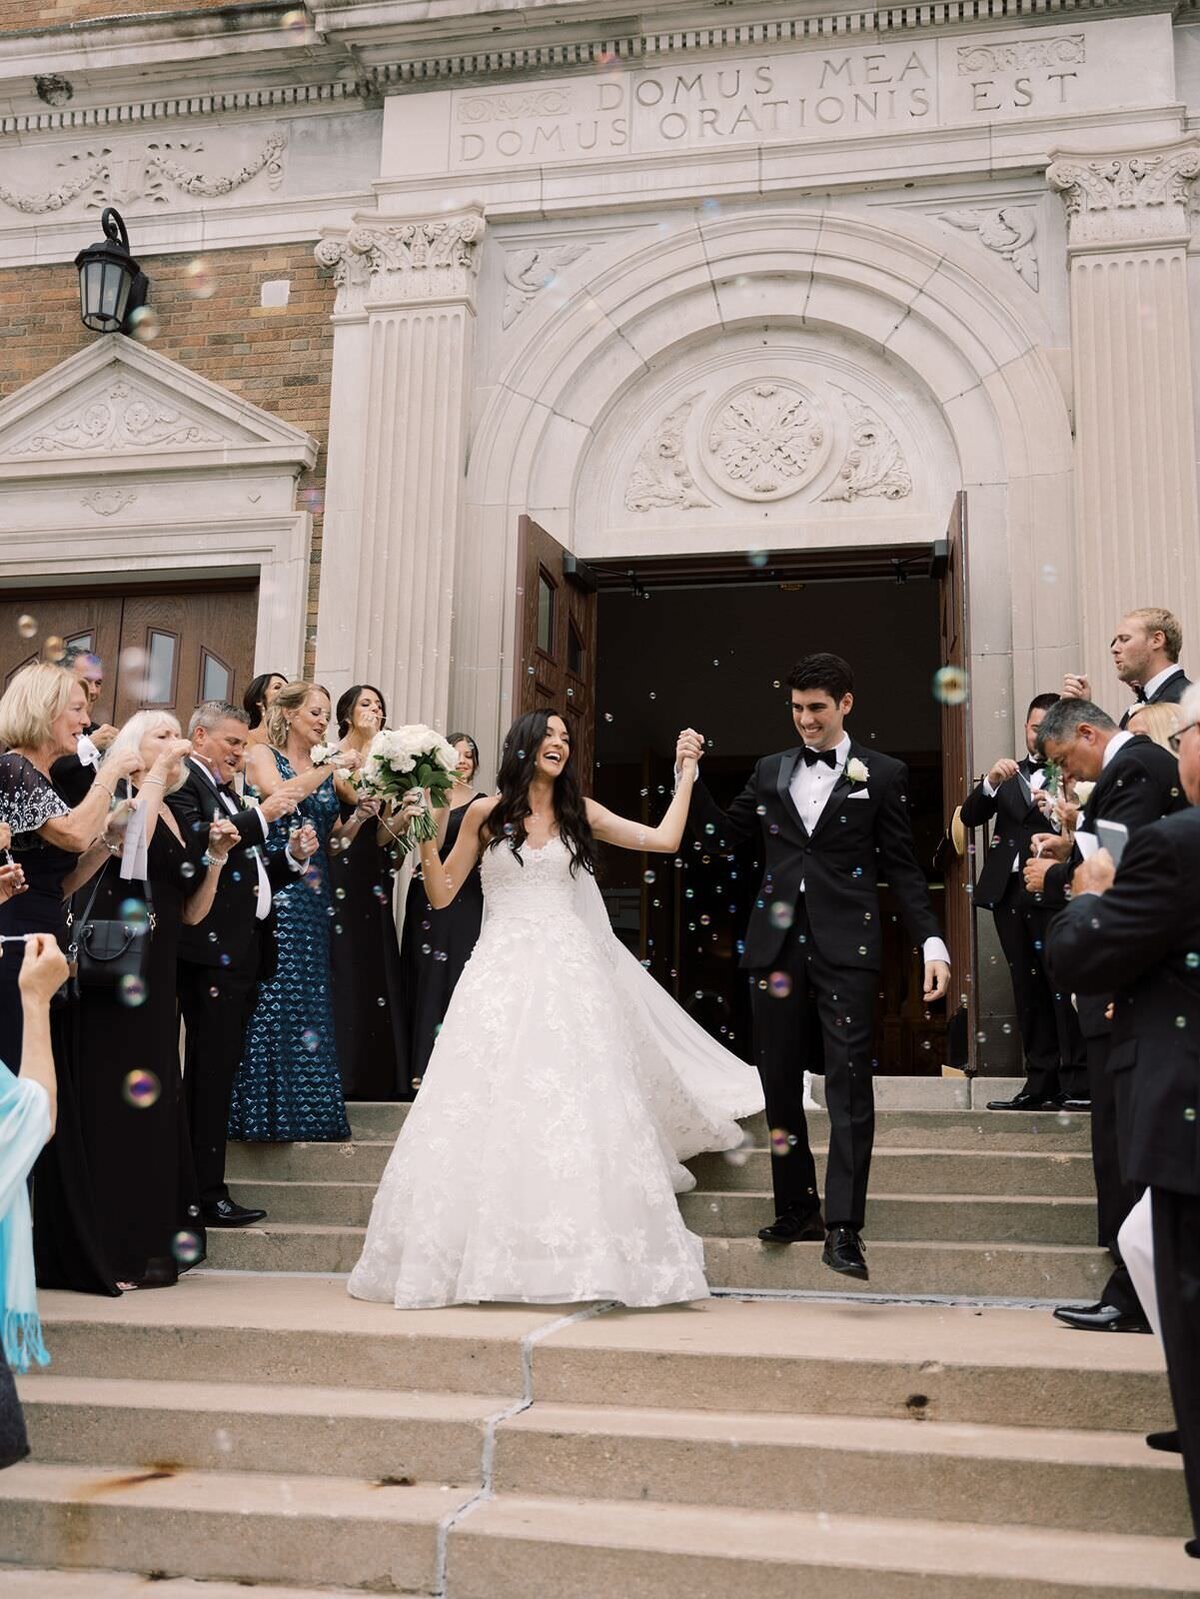 Bride-and-Groom-Exit-Church-with-Clementine-Events-and-Sarah-Sunstrom-Photography